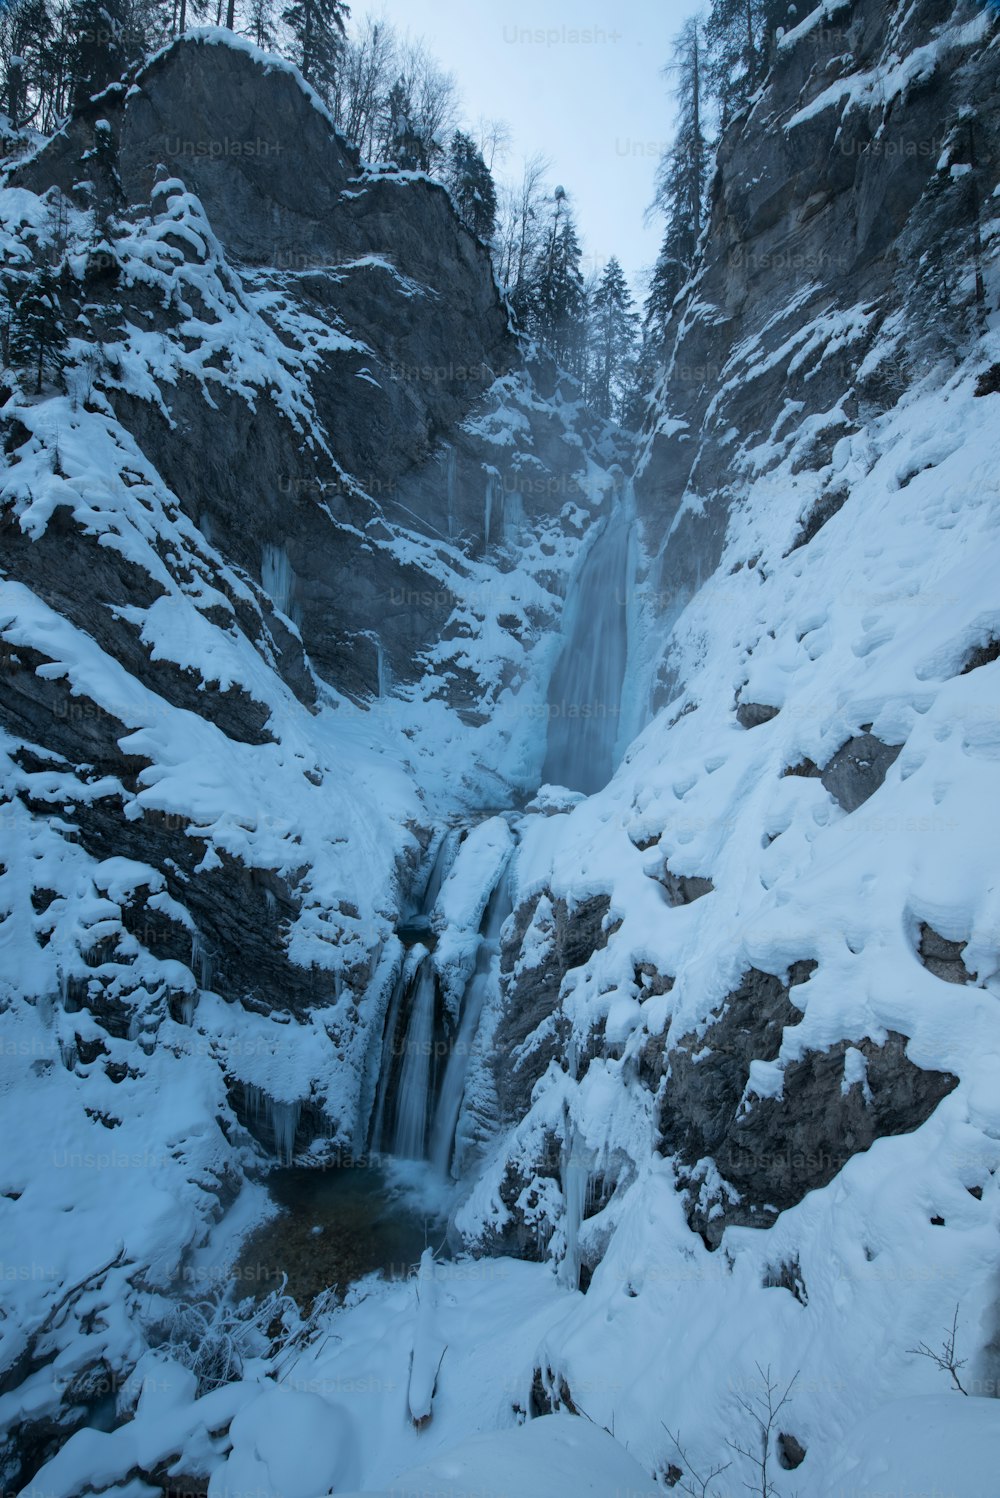 a snow covered mountain side with a waterfall